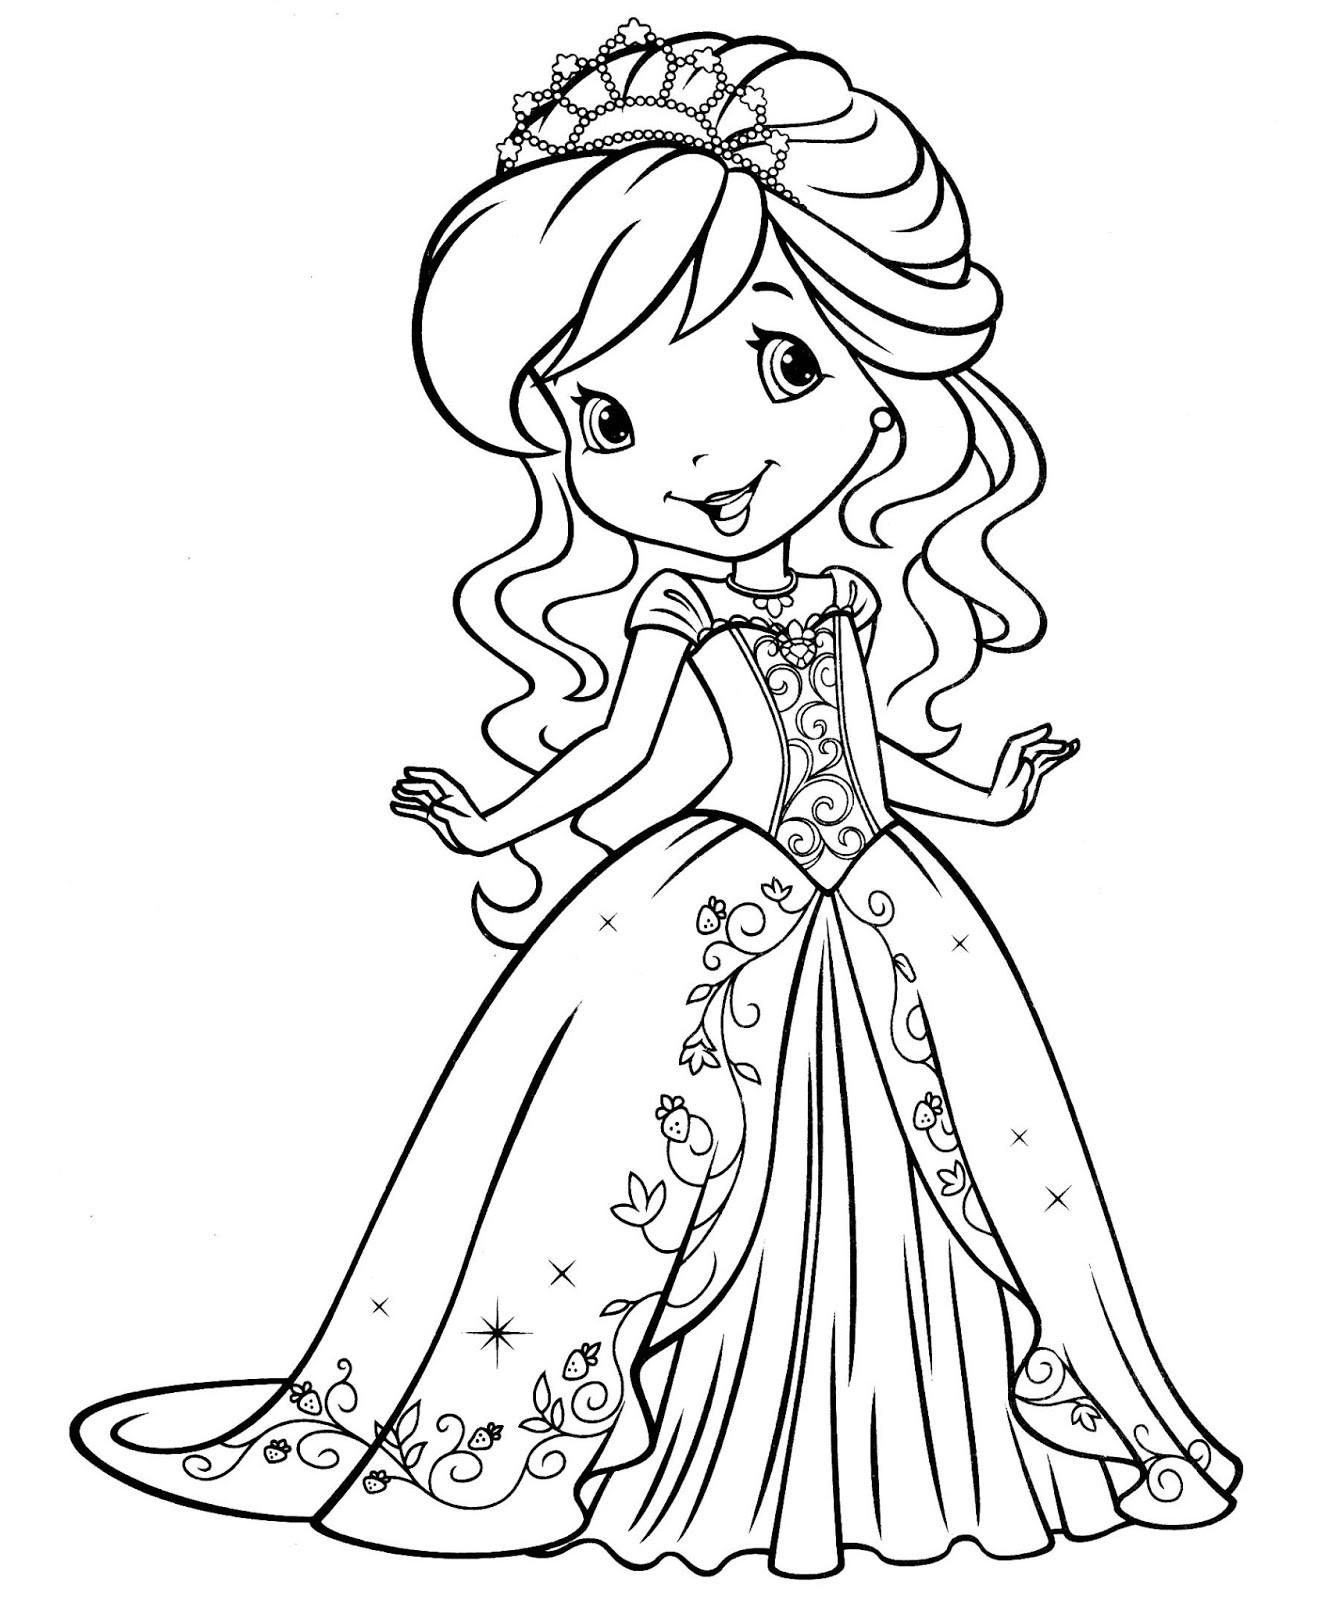 Cute Coloring Pages For Girls
 Coloring Pages for Girls Best Coloring Pages For Kids